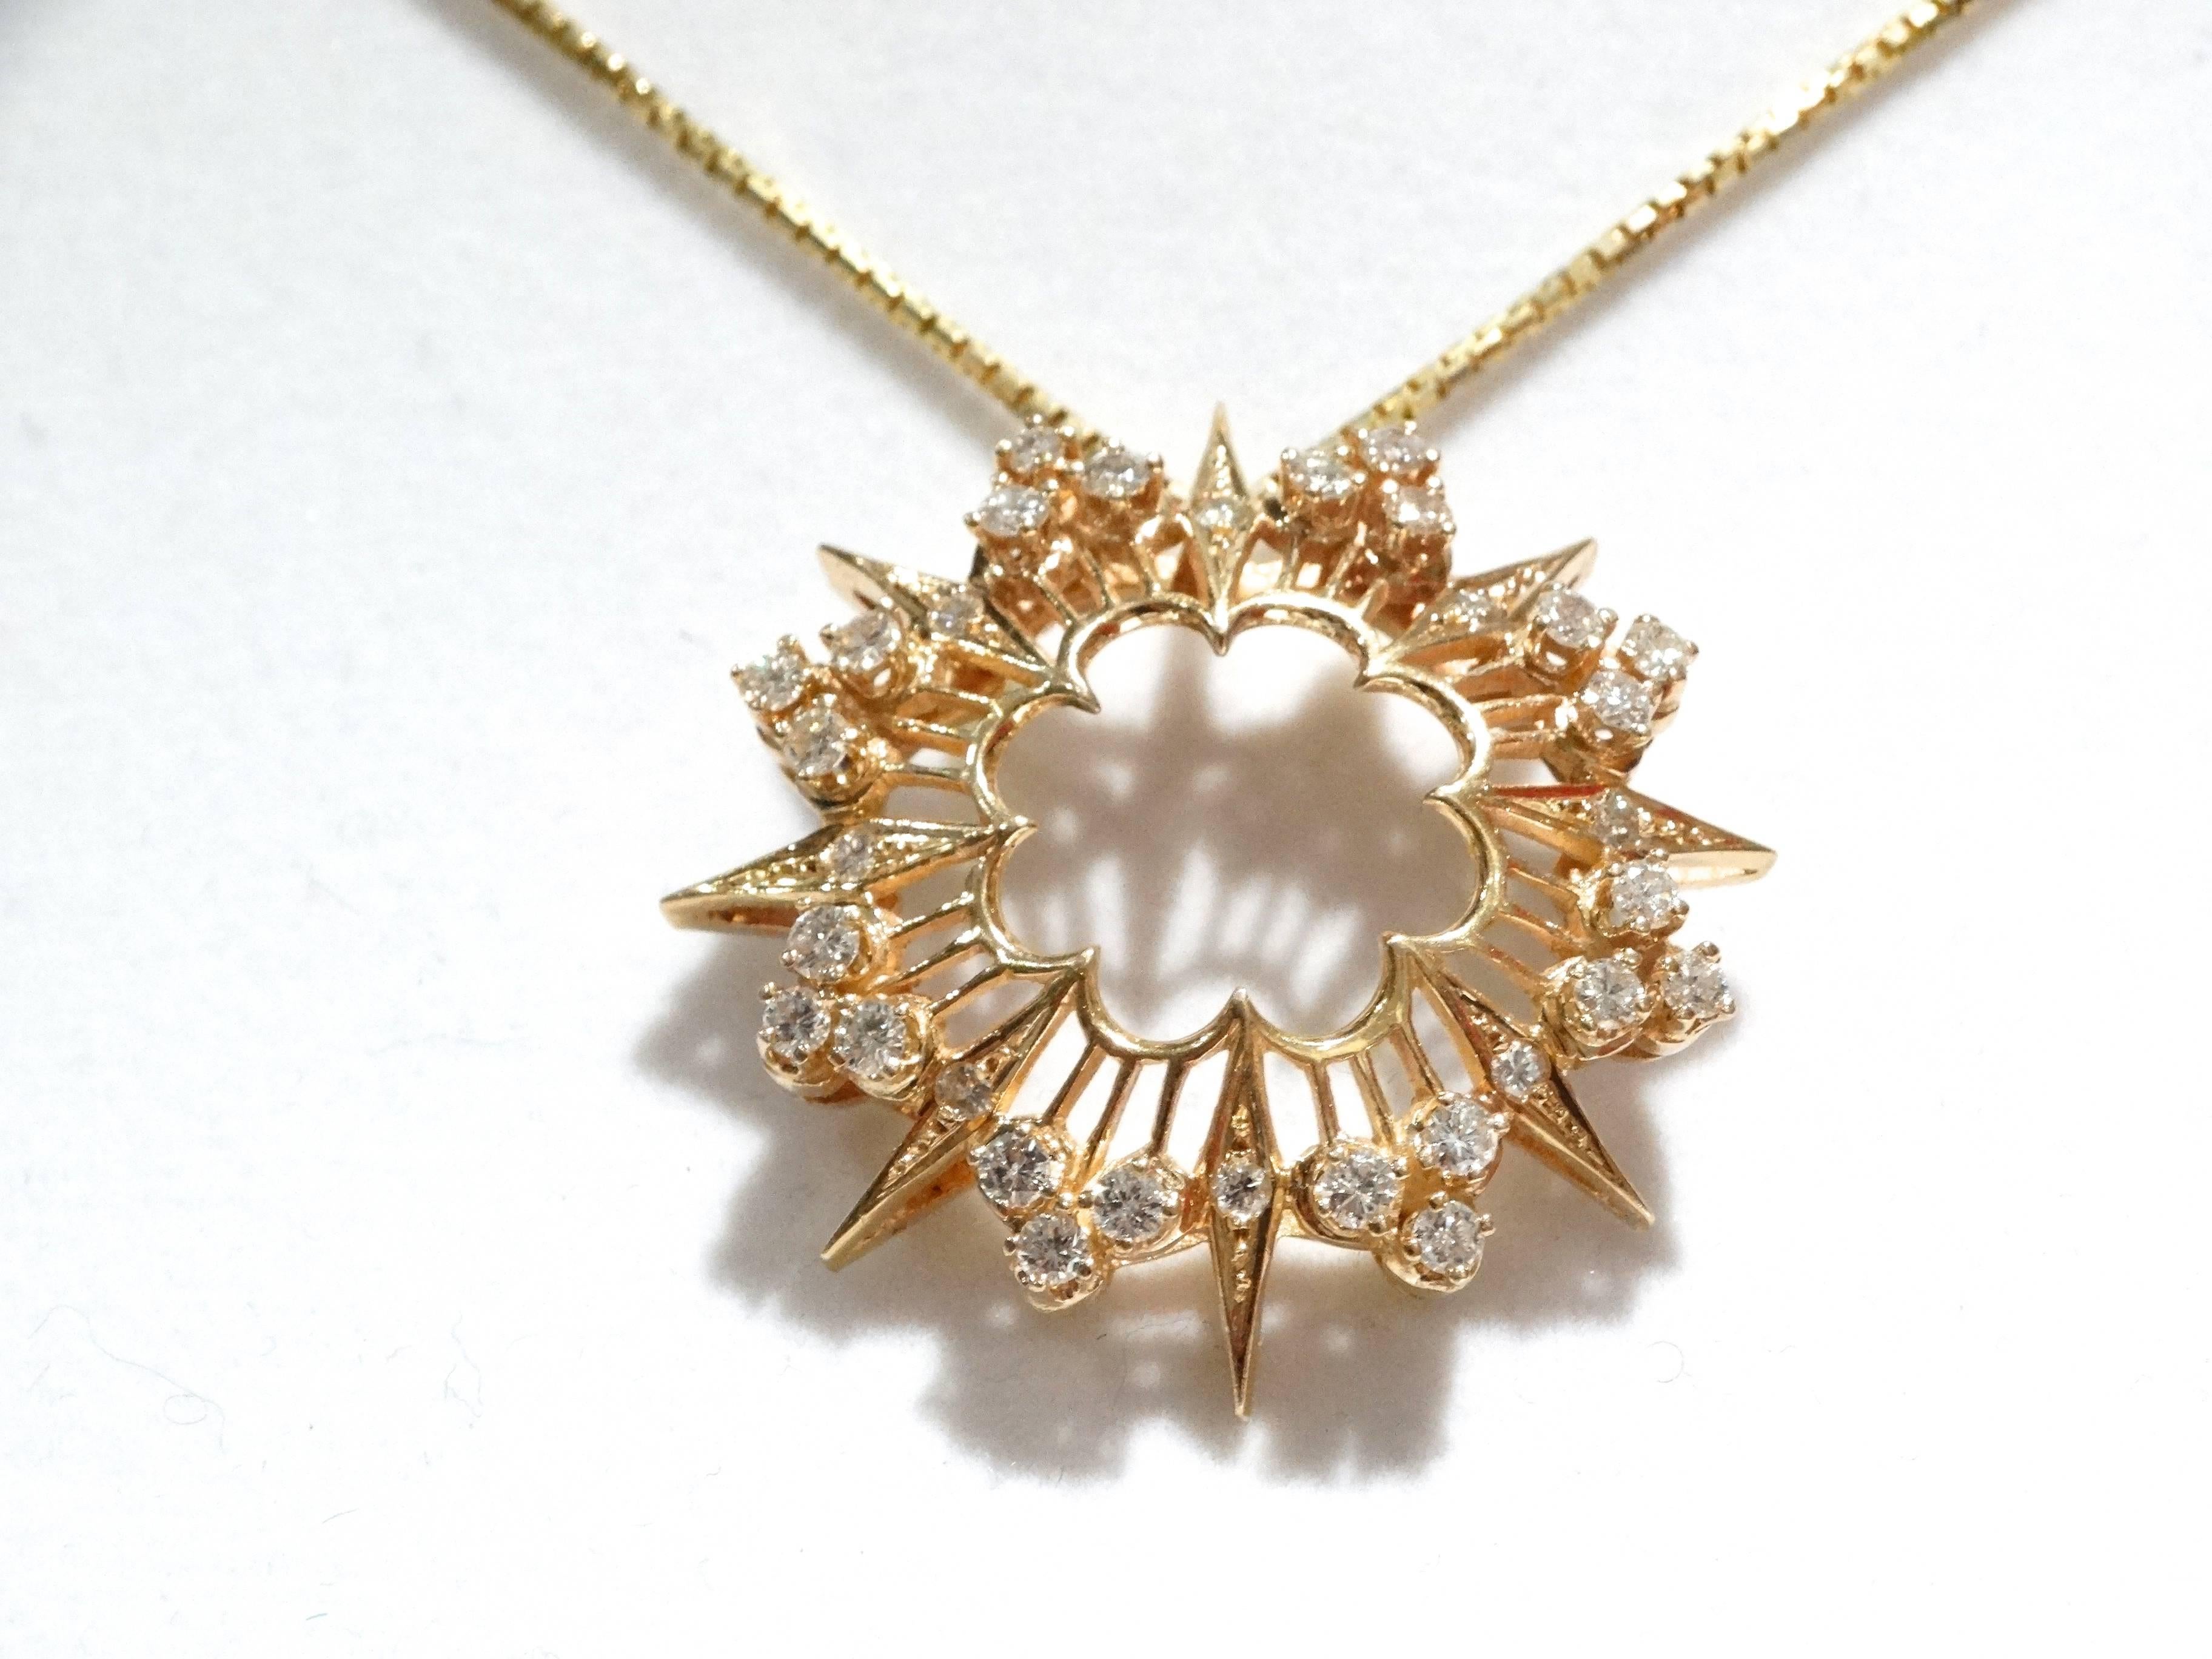 A beautiful 1970's 14kt yellow gold fancy sunburst pendent containing twenty-four (24) brilliant cut diamonds weighing approximately 1.20cts. Total weight and eight (8) brilliant cut diamonds weighing approximately .20cts total weight. All diamonds